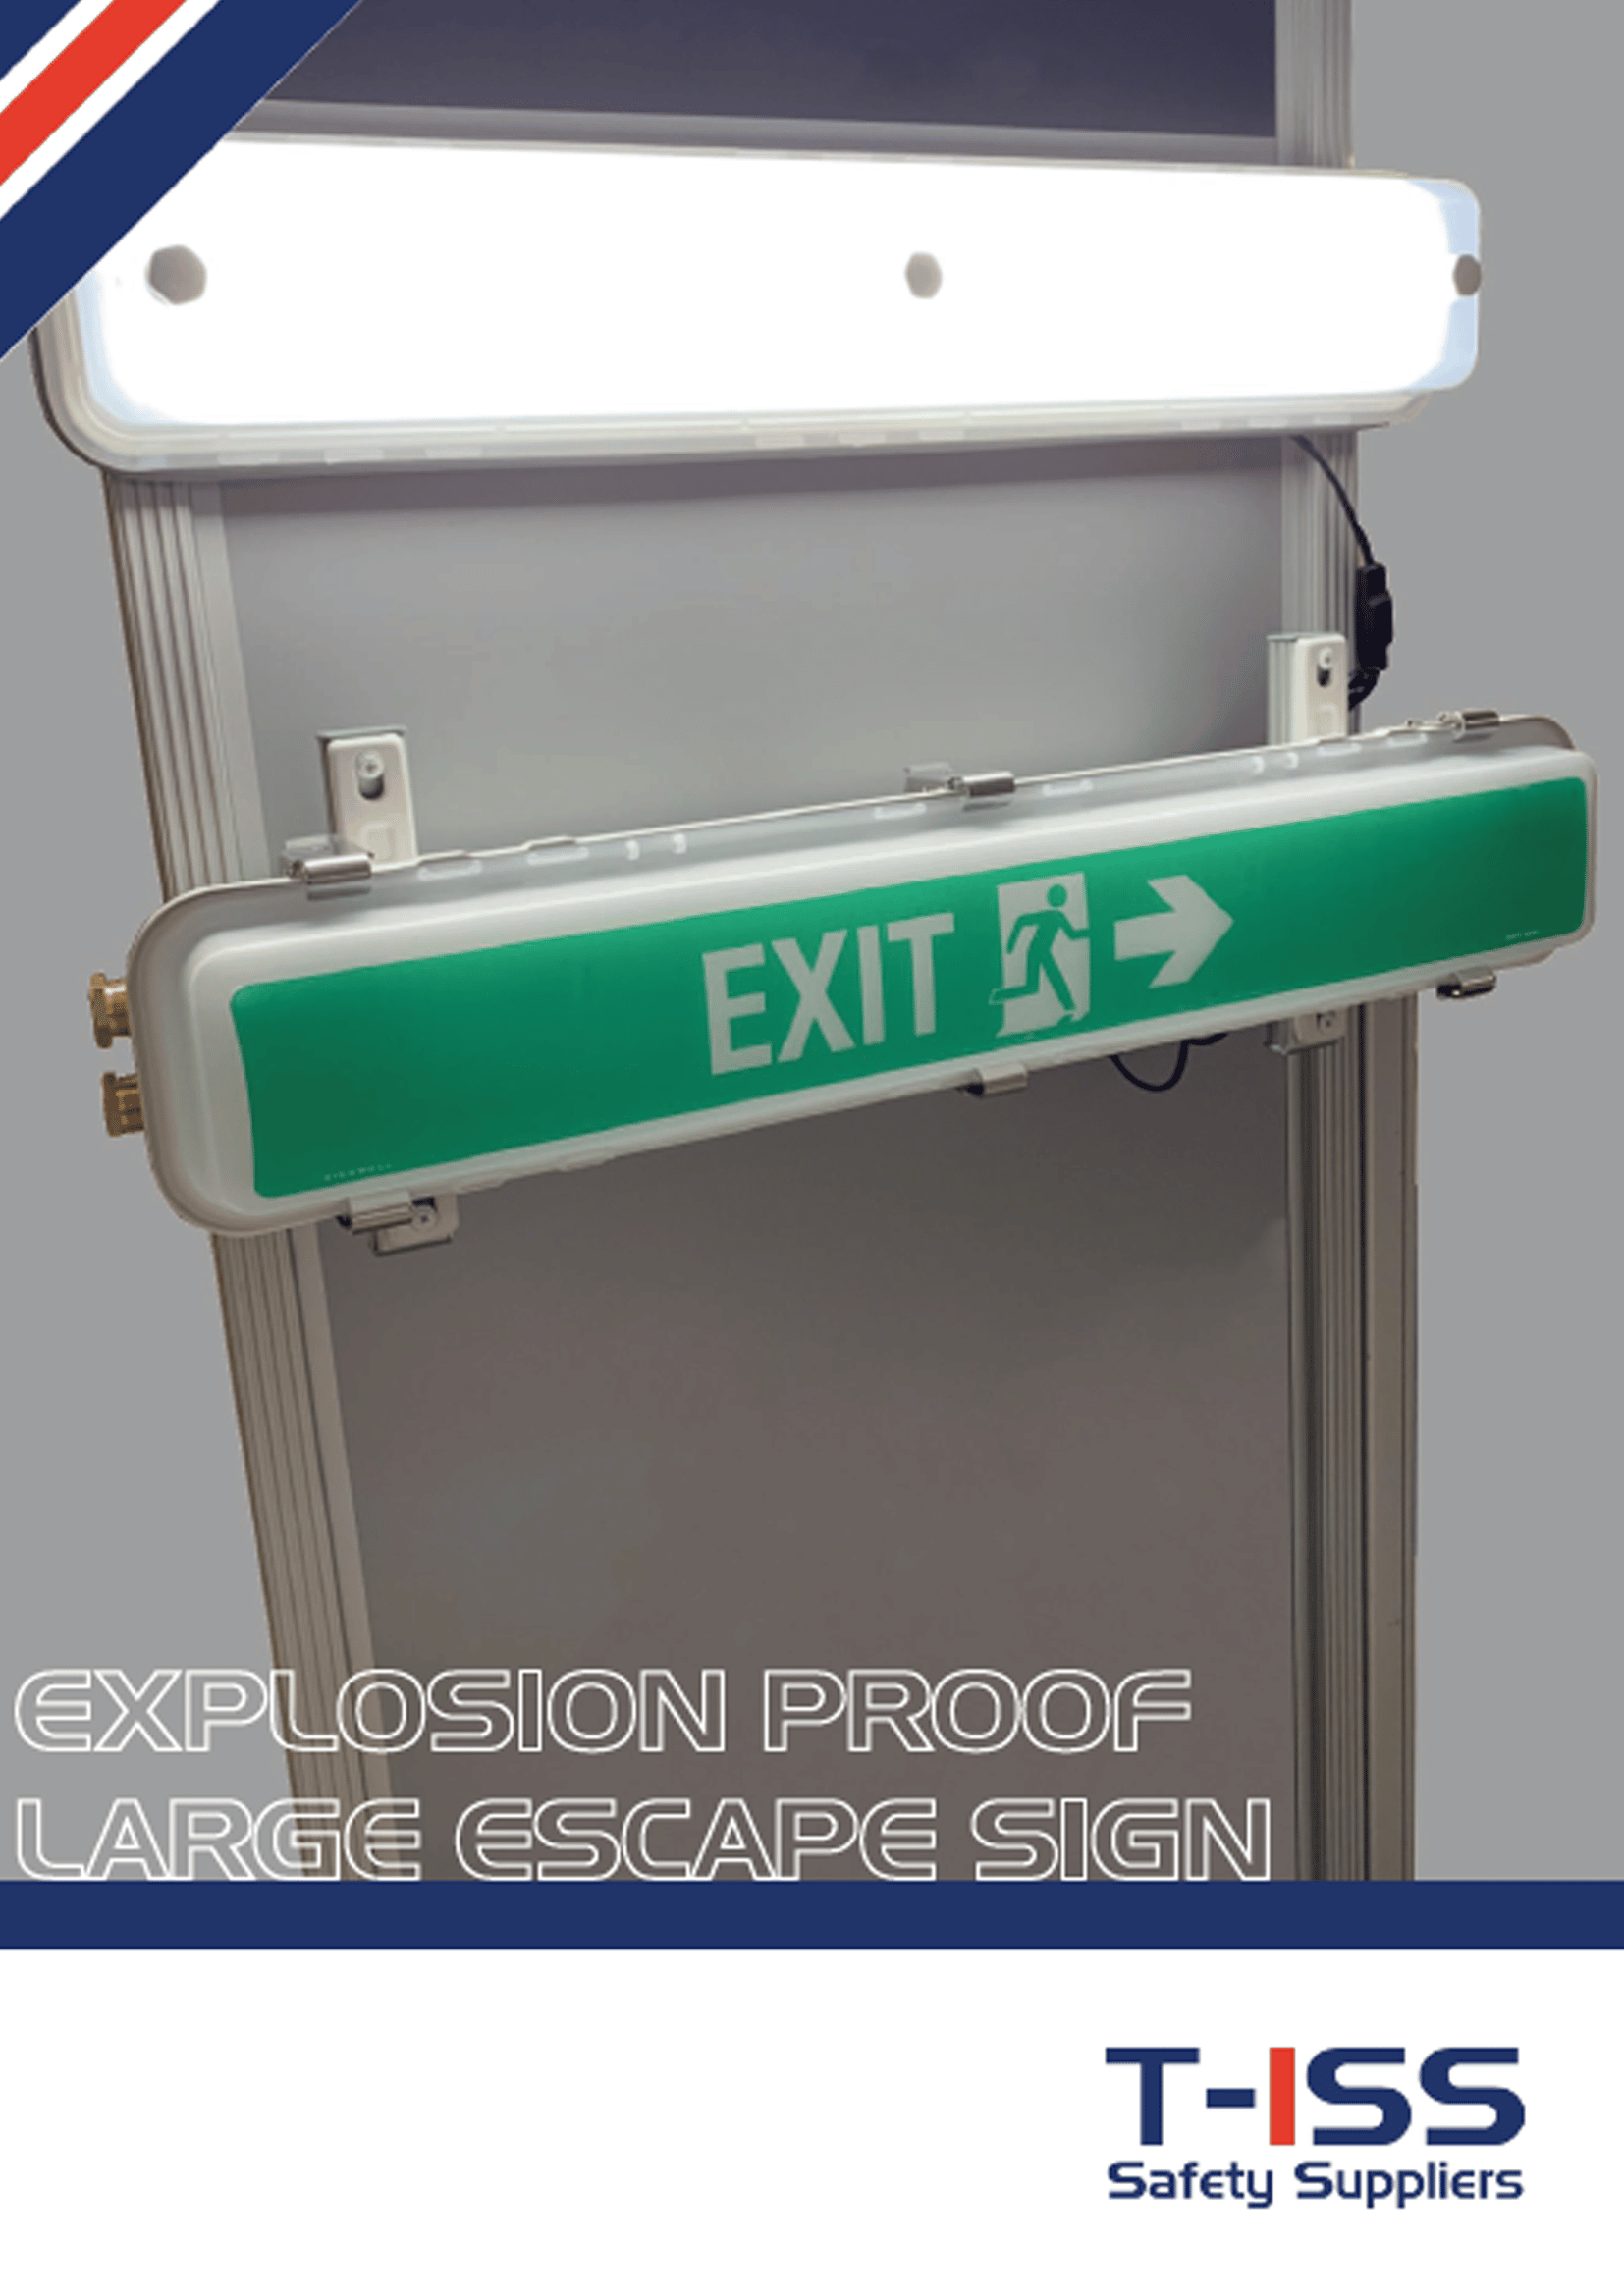 Flyer Explosion proof large escape sign by T-ISS Safety Suppliers